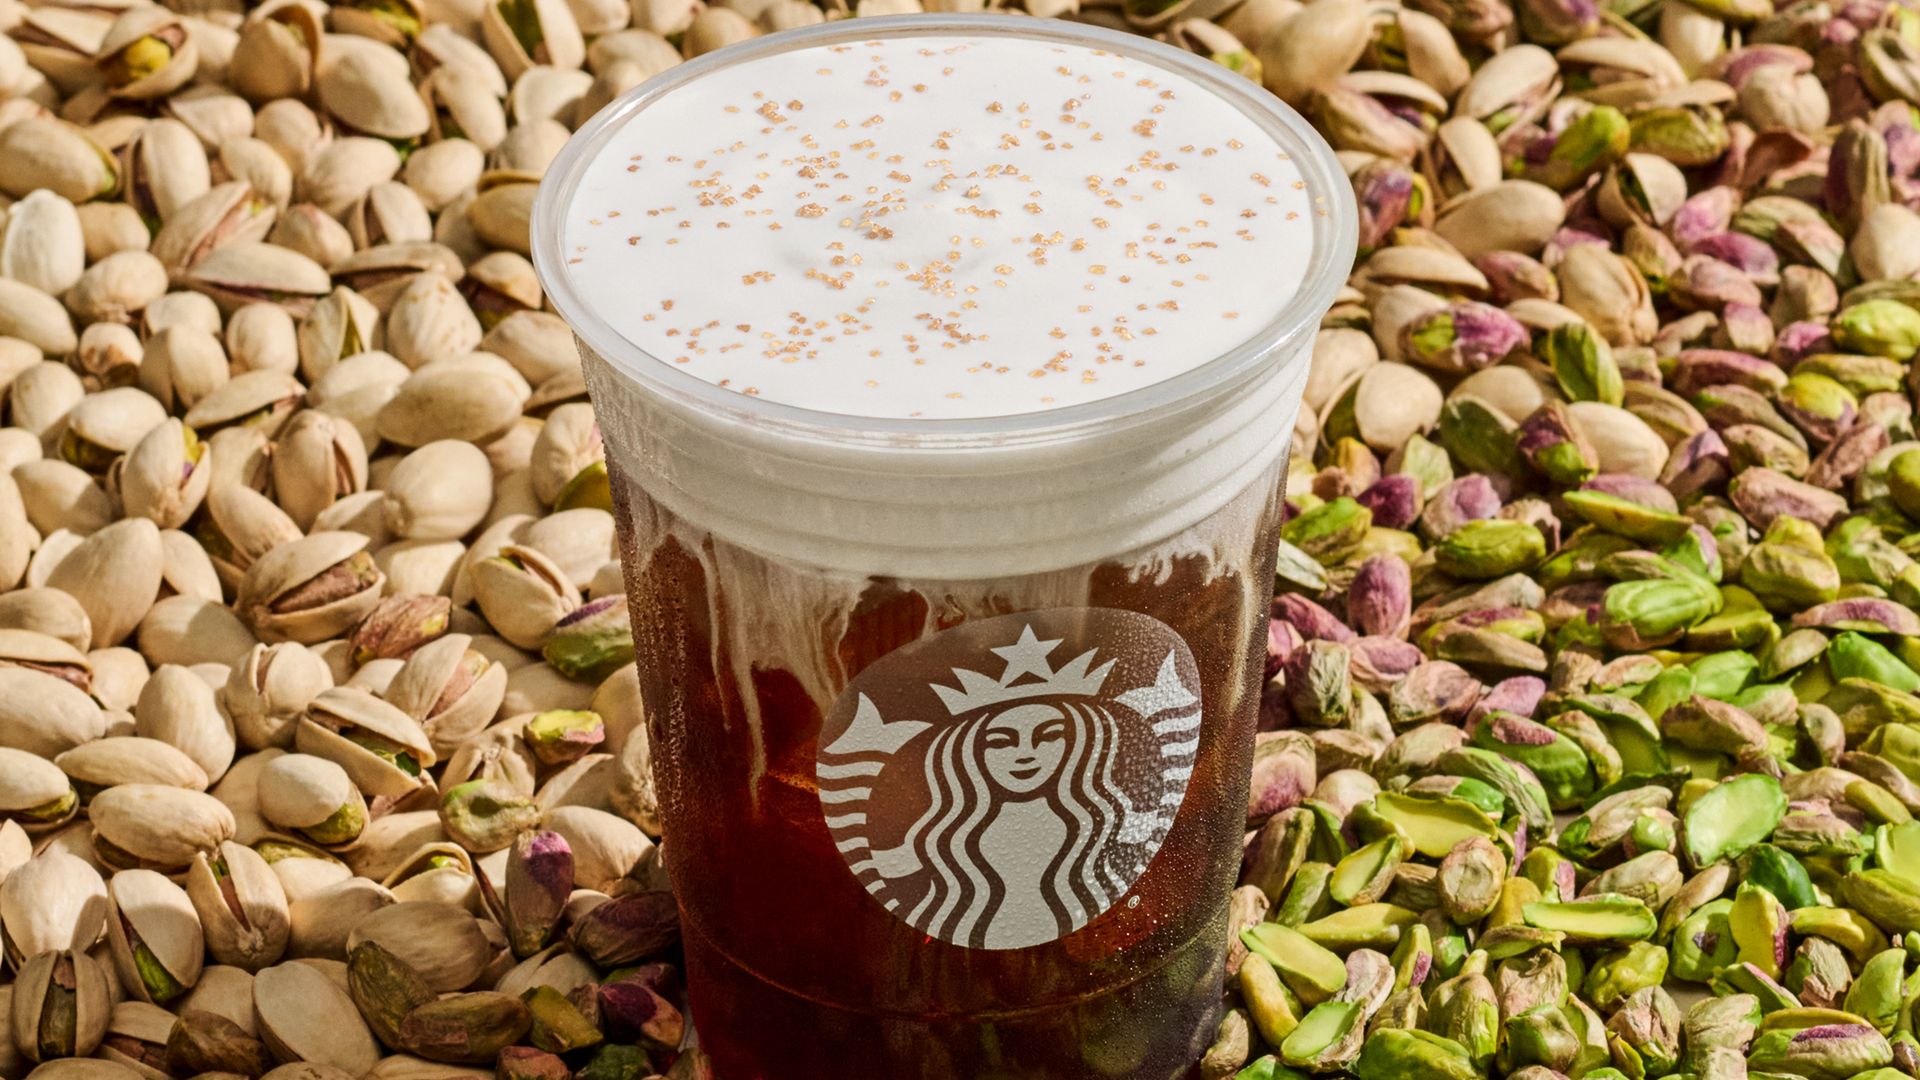 Starbucks plastic cup with cold foam on top of pistachio nuts